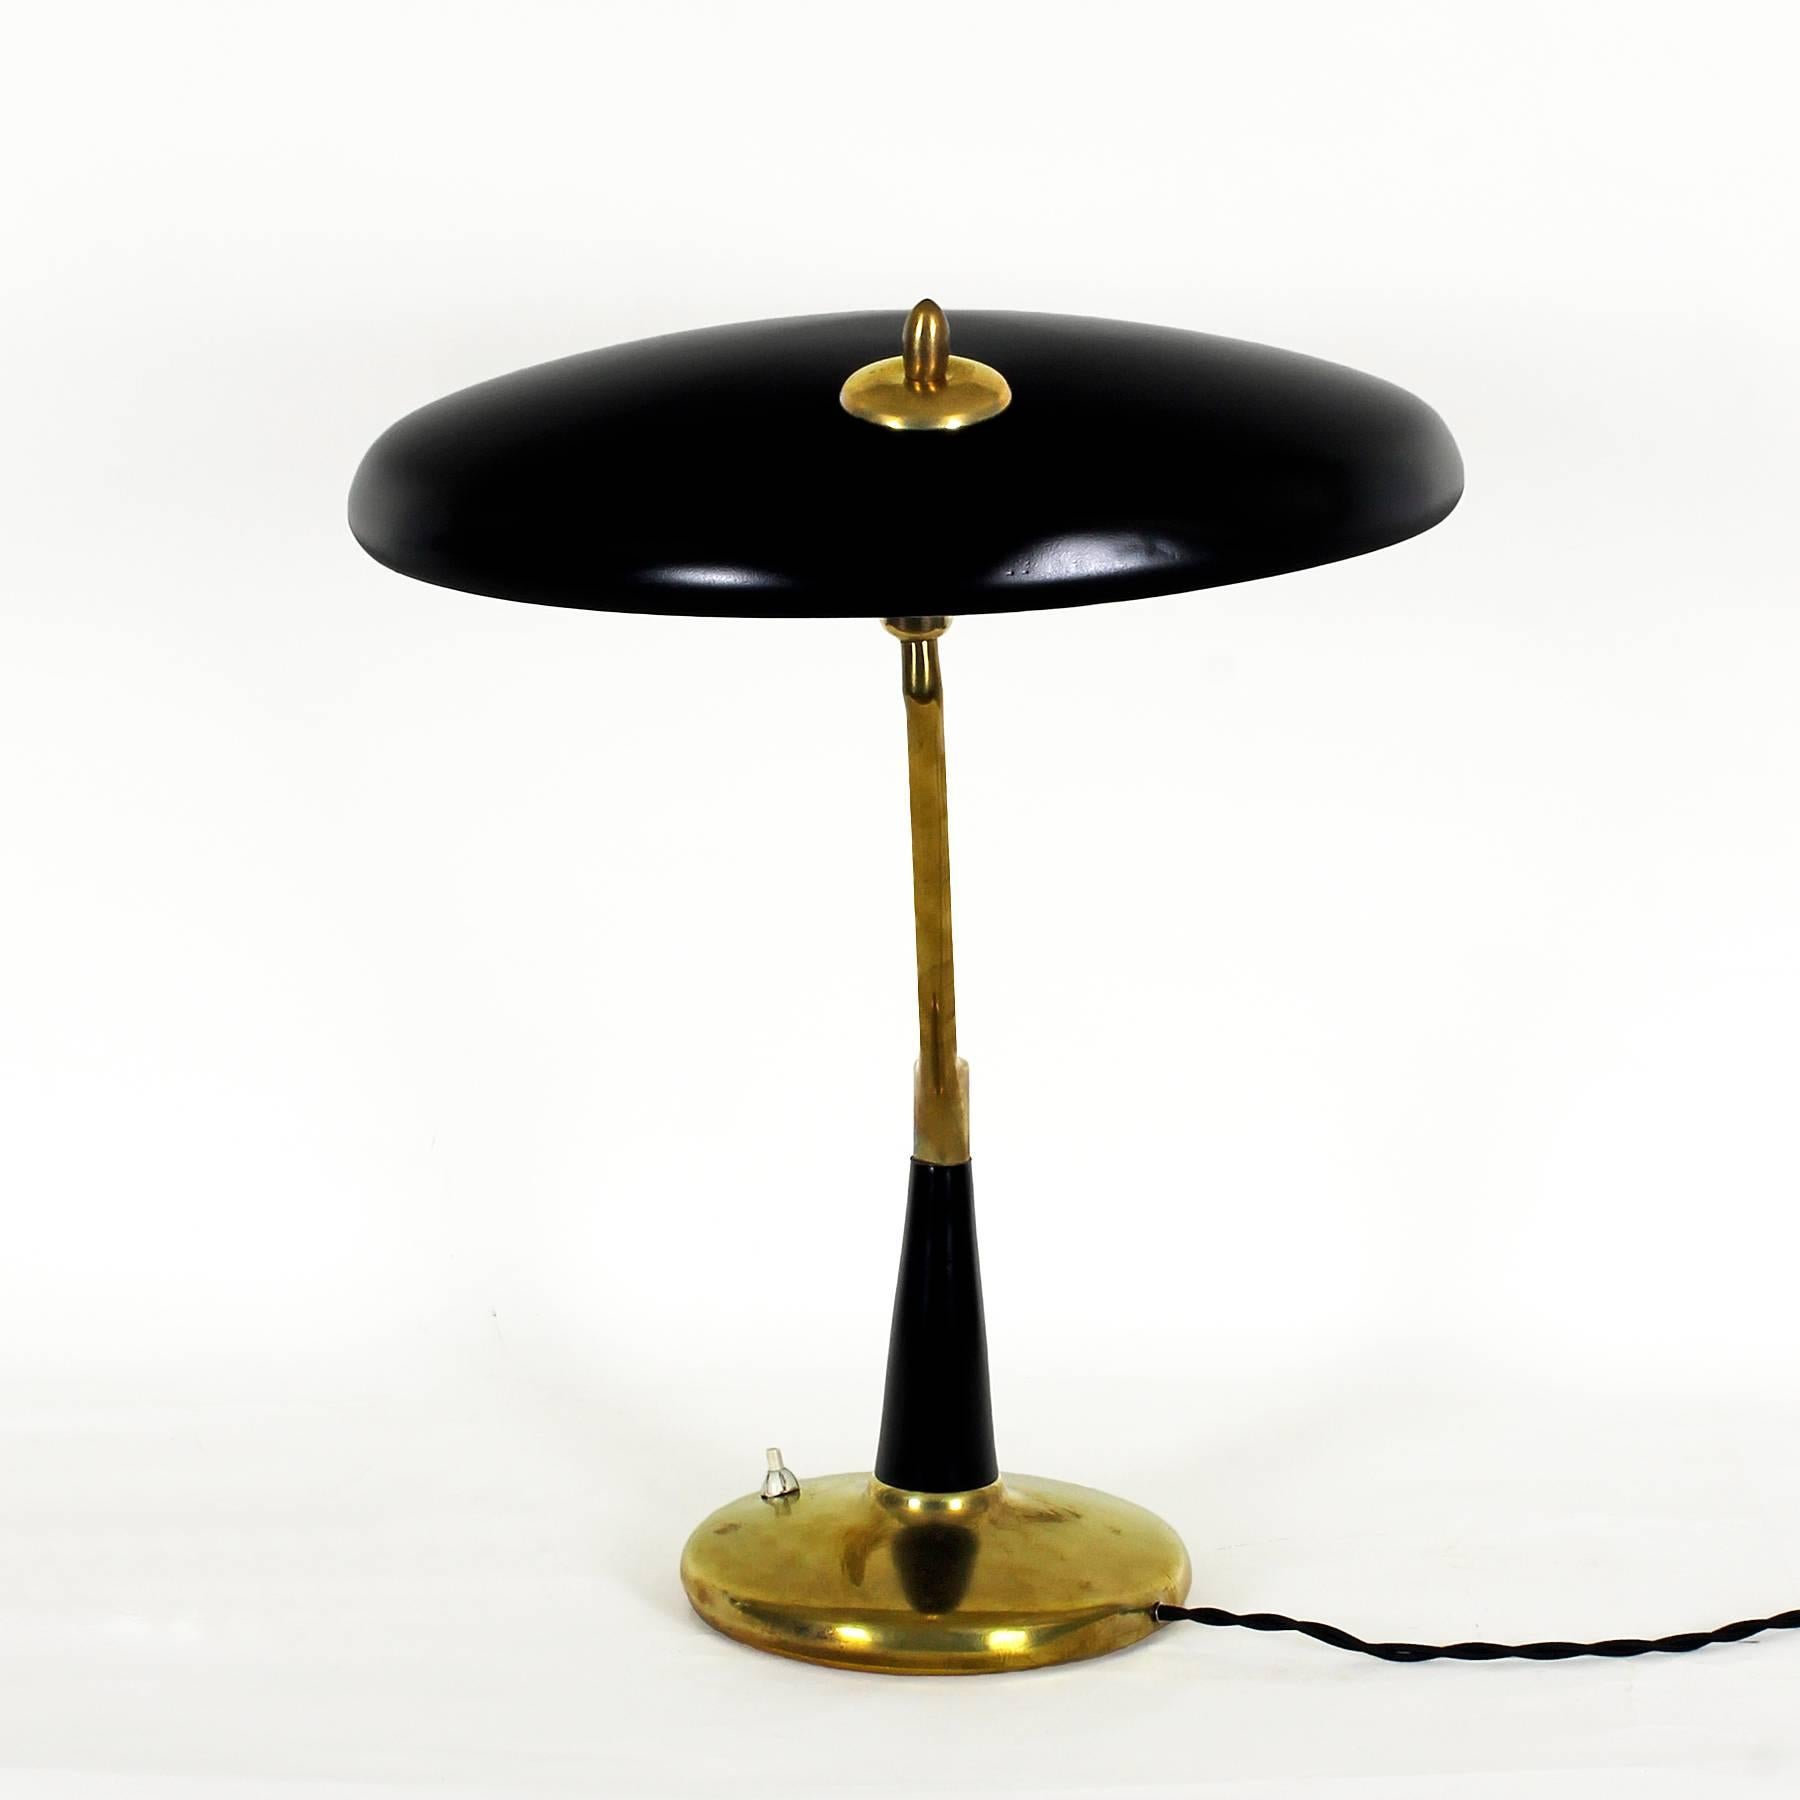 Spectacular table or desk lamp, polished solid brass and black lacquered sheet metal. Adjustable lampshade, new electricity system.
Design: Oscar Torlasco 
Maker: Lumi

Italy, 1956.